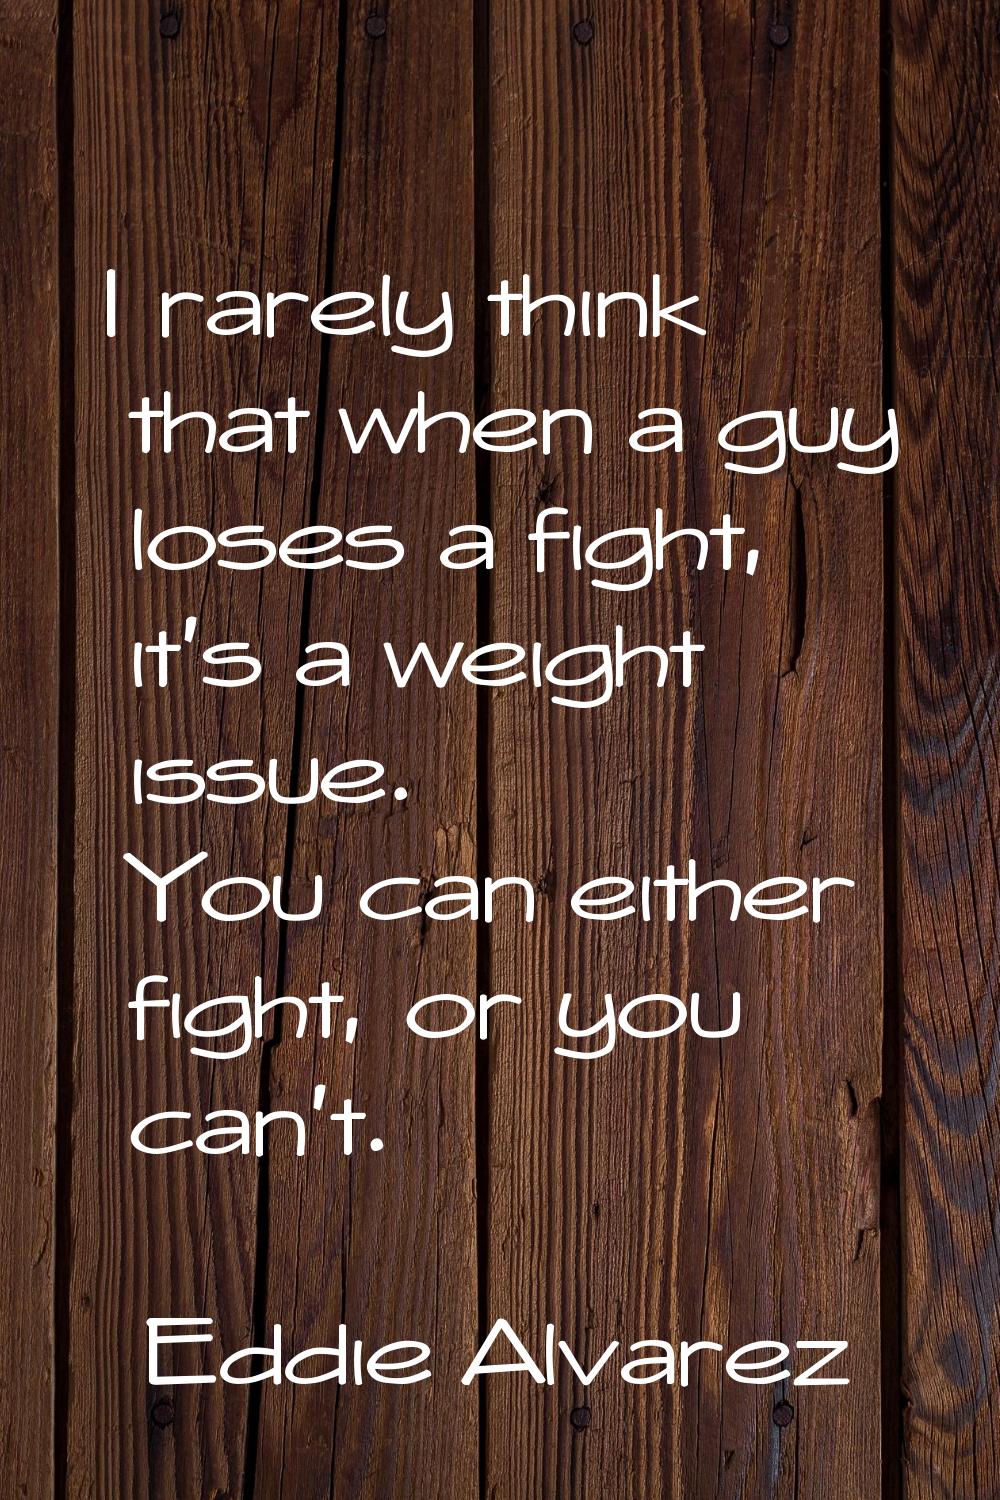 I rarely think that when a guy loses a fight, it's a weight issue. You can either fight, or you can